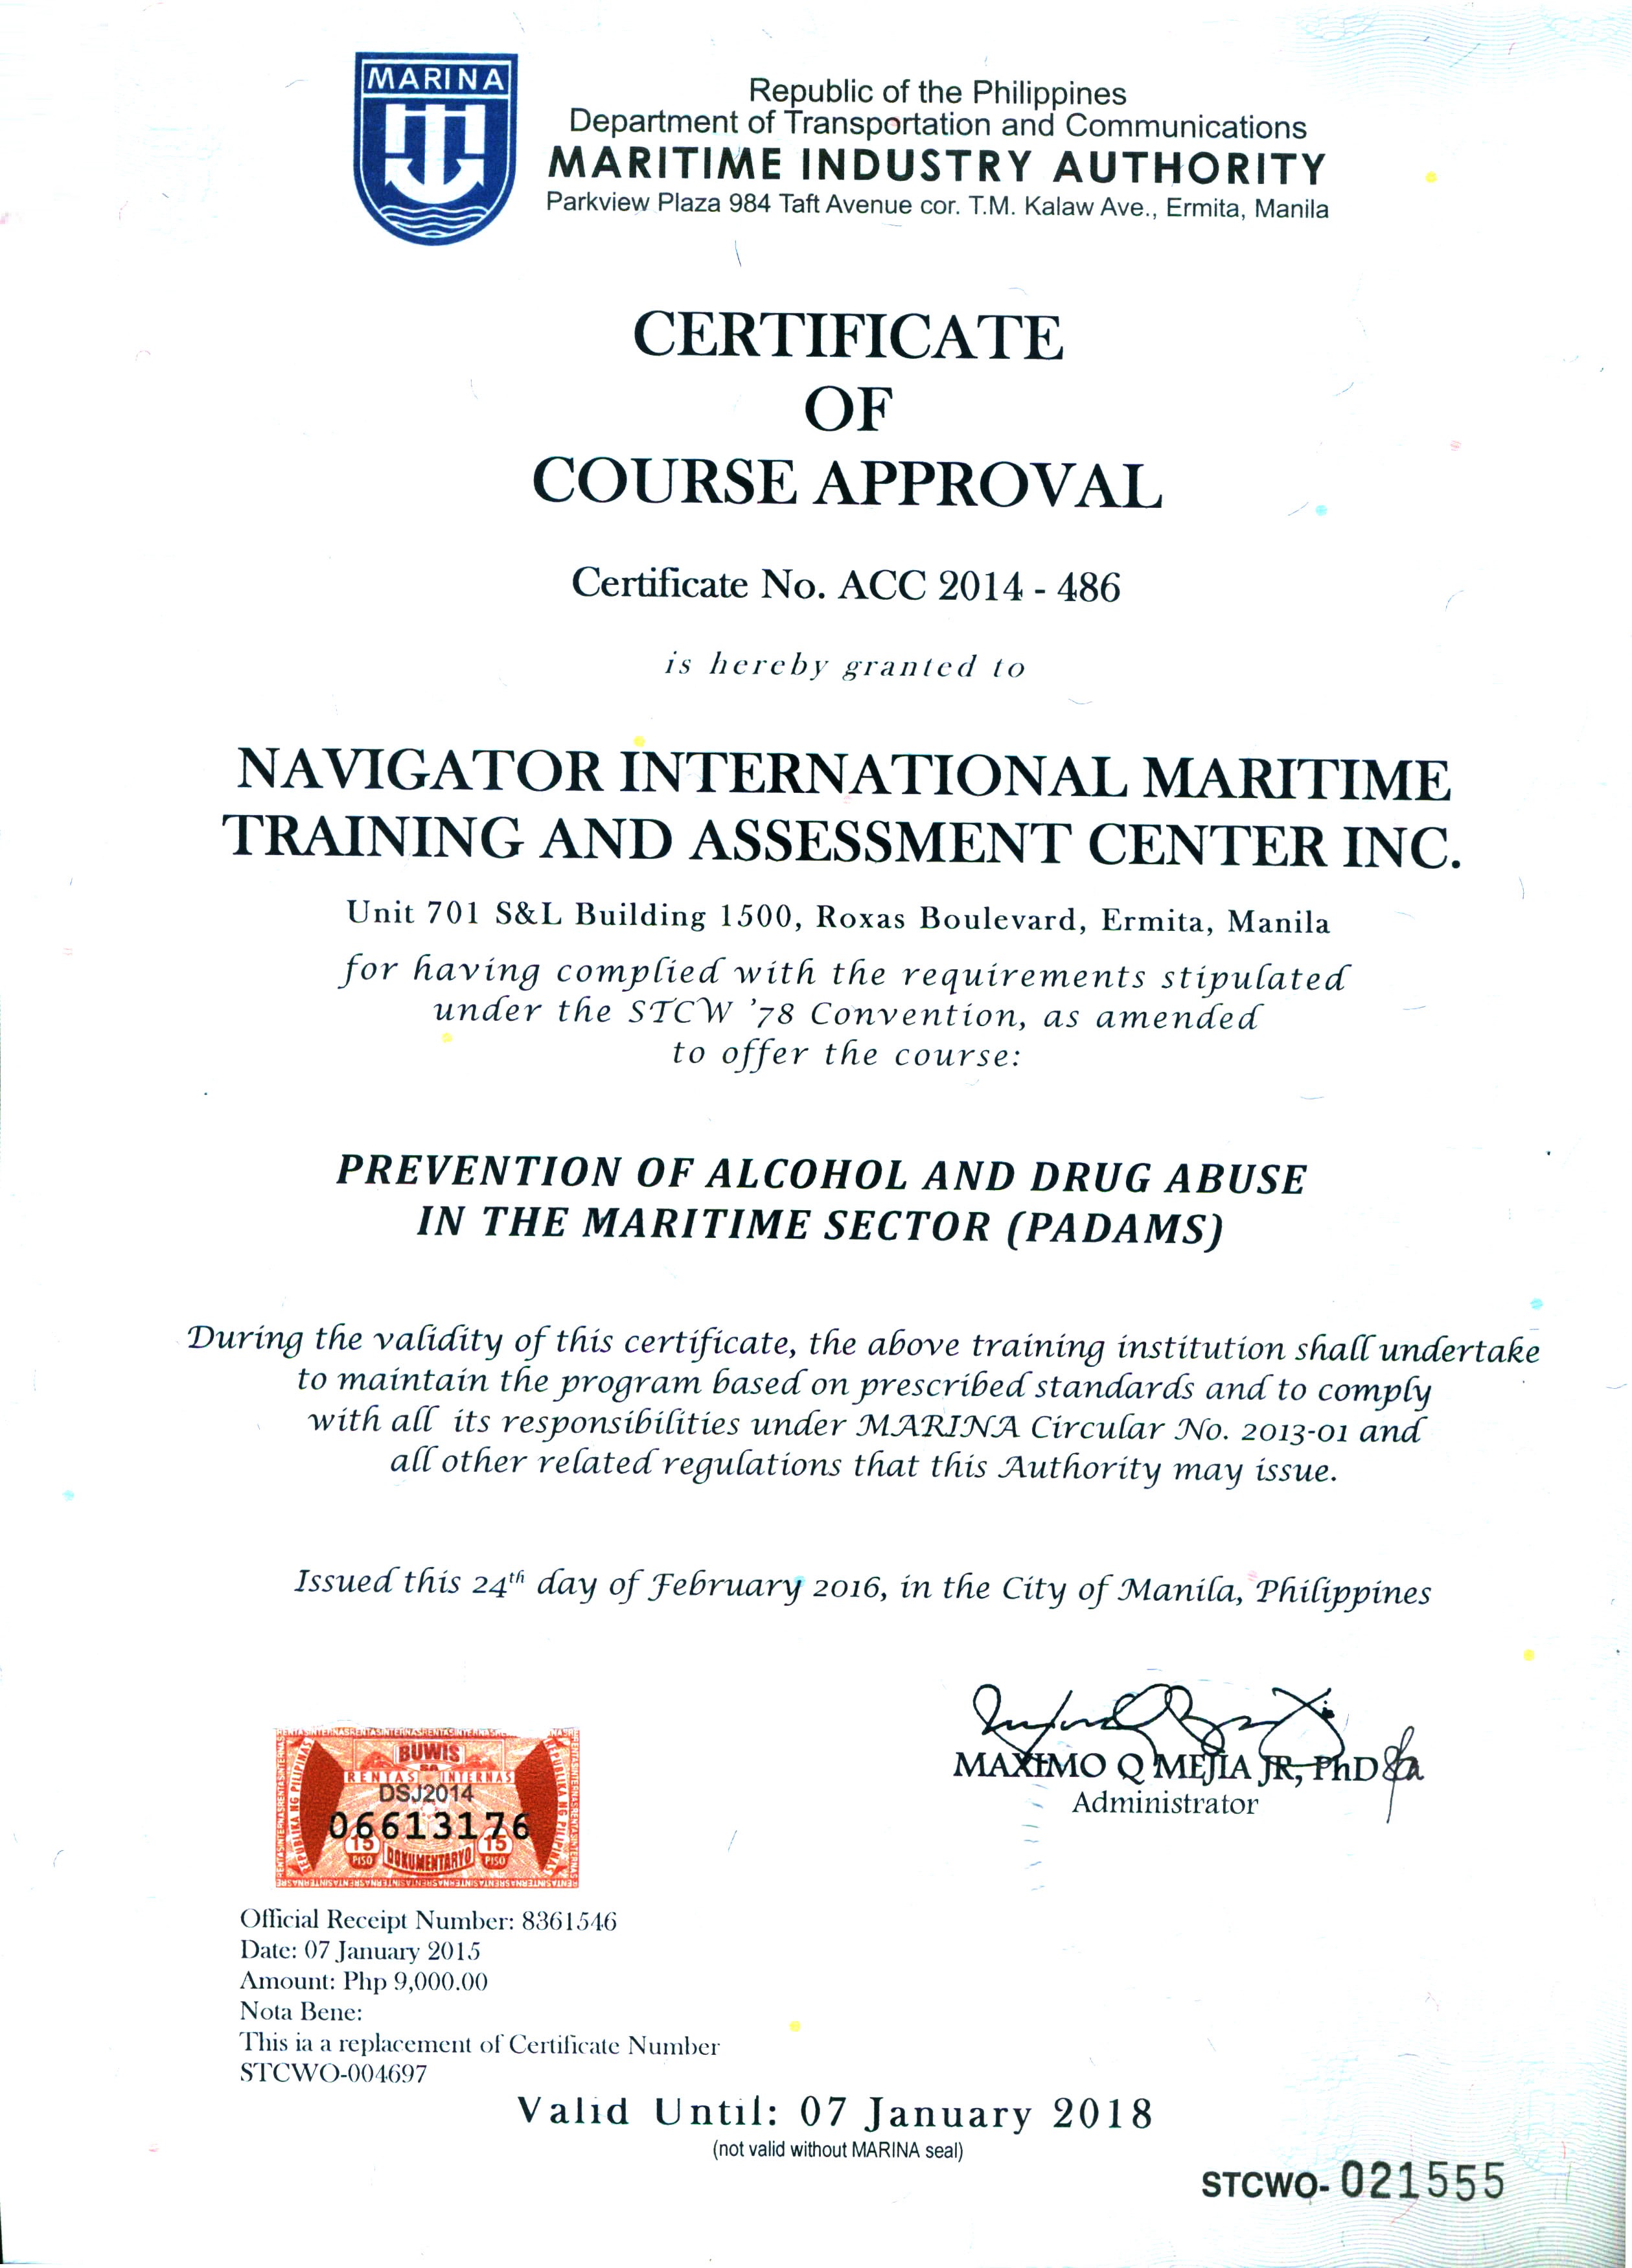 Prevention of alcohol and drug abuse in the maritime sector